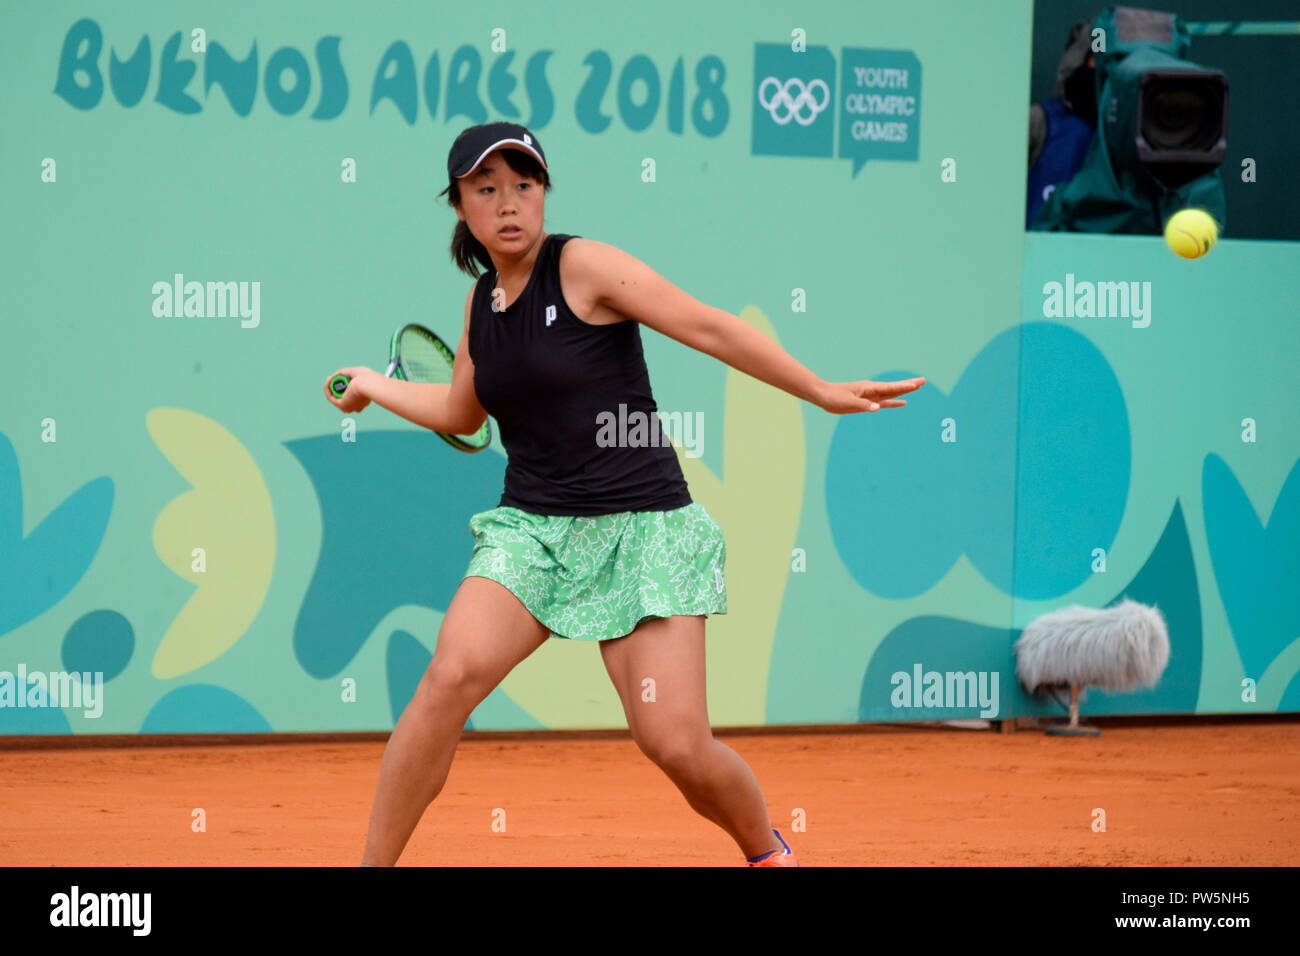 Buenos Aires, Buenos Aires, Argentina. 11th Oct, 2018. Yuki Naito seen in action against the Colombian Maria Osorio who inspired the women in the tennis games of the Olympic youth games during the Women's singles, quarter finals with points 7-6, 3-6, 1-6. Credit: Fernando Oduber/SOPA Images/ZUMA Wire/Alamy Live News Stock Photo